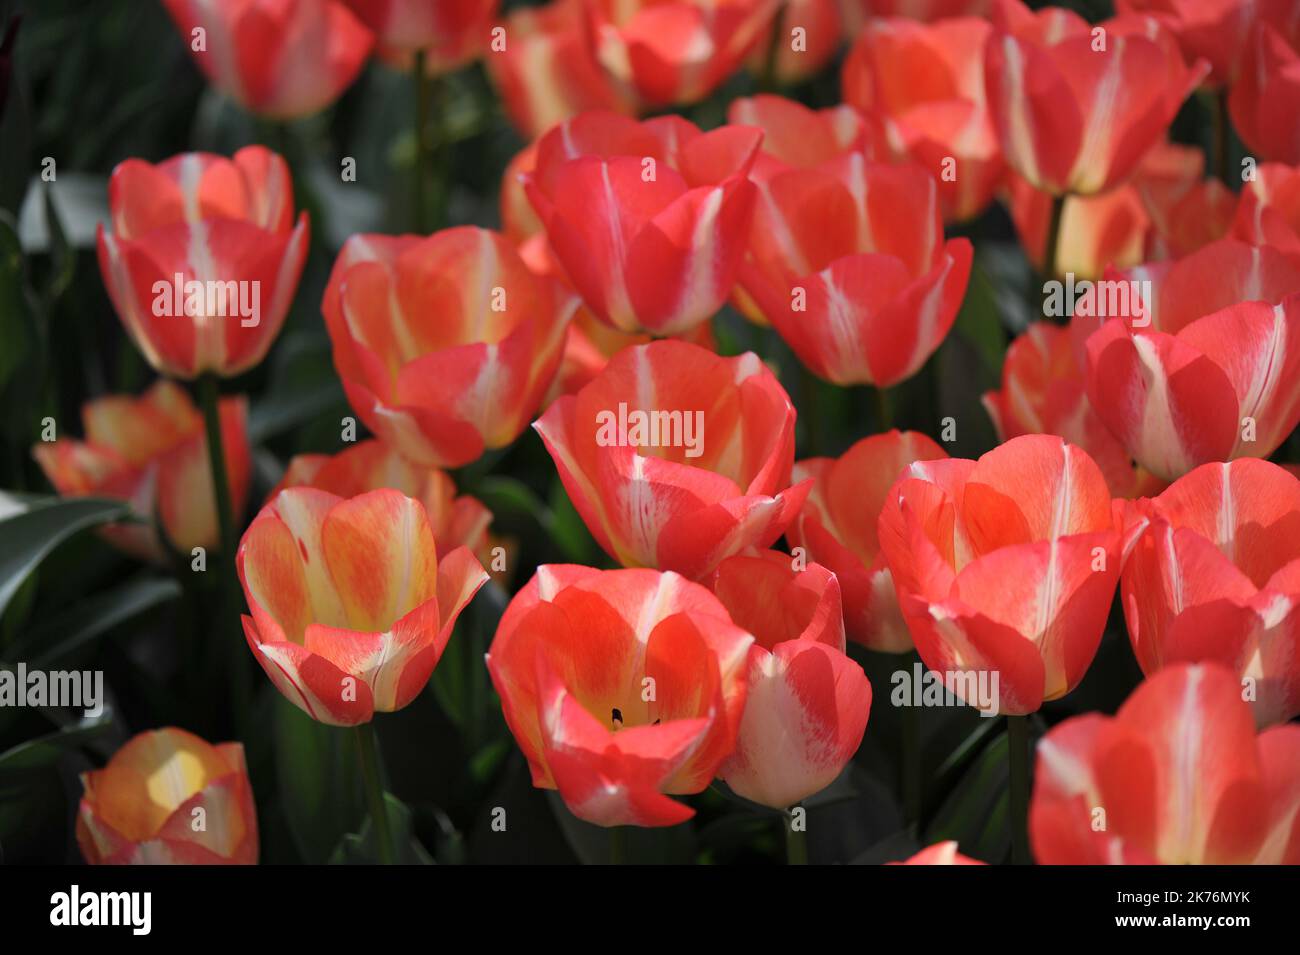 Red and white Triumph tulips (Tulipa) Spryng Sunset bloom in a garden in March Stock Photo